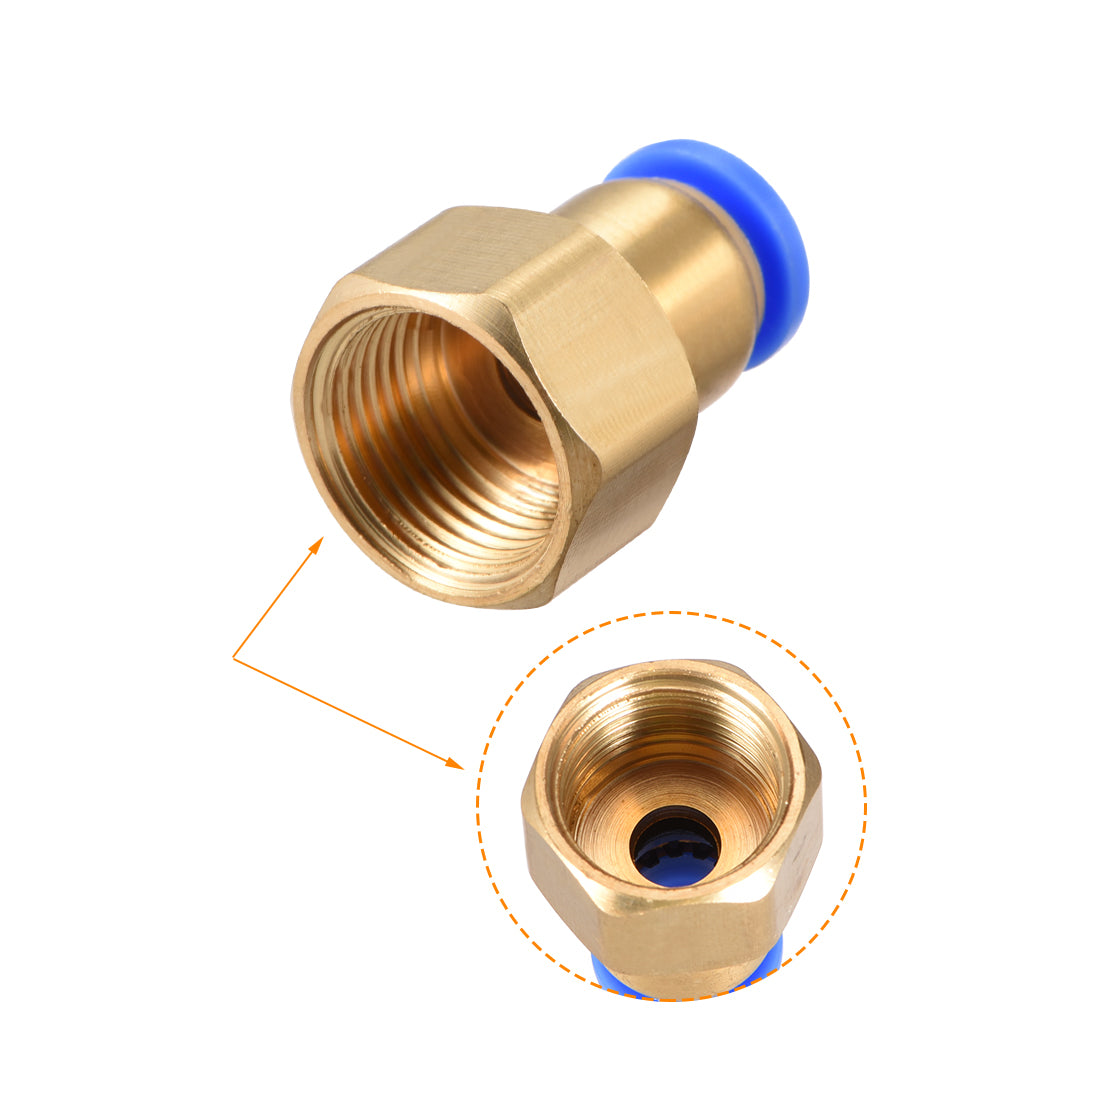 uxcell Uxcell Push to Connect Tube Fitting Adapter 8mm OD x G3/8" Female